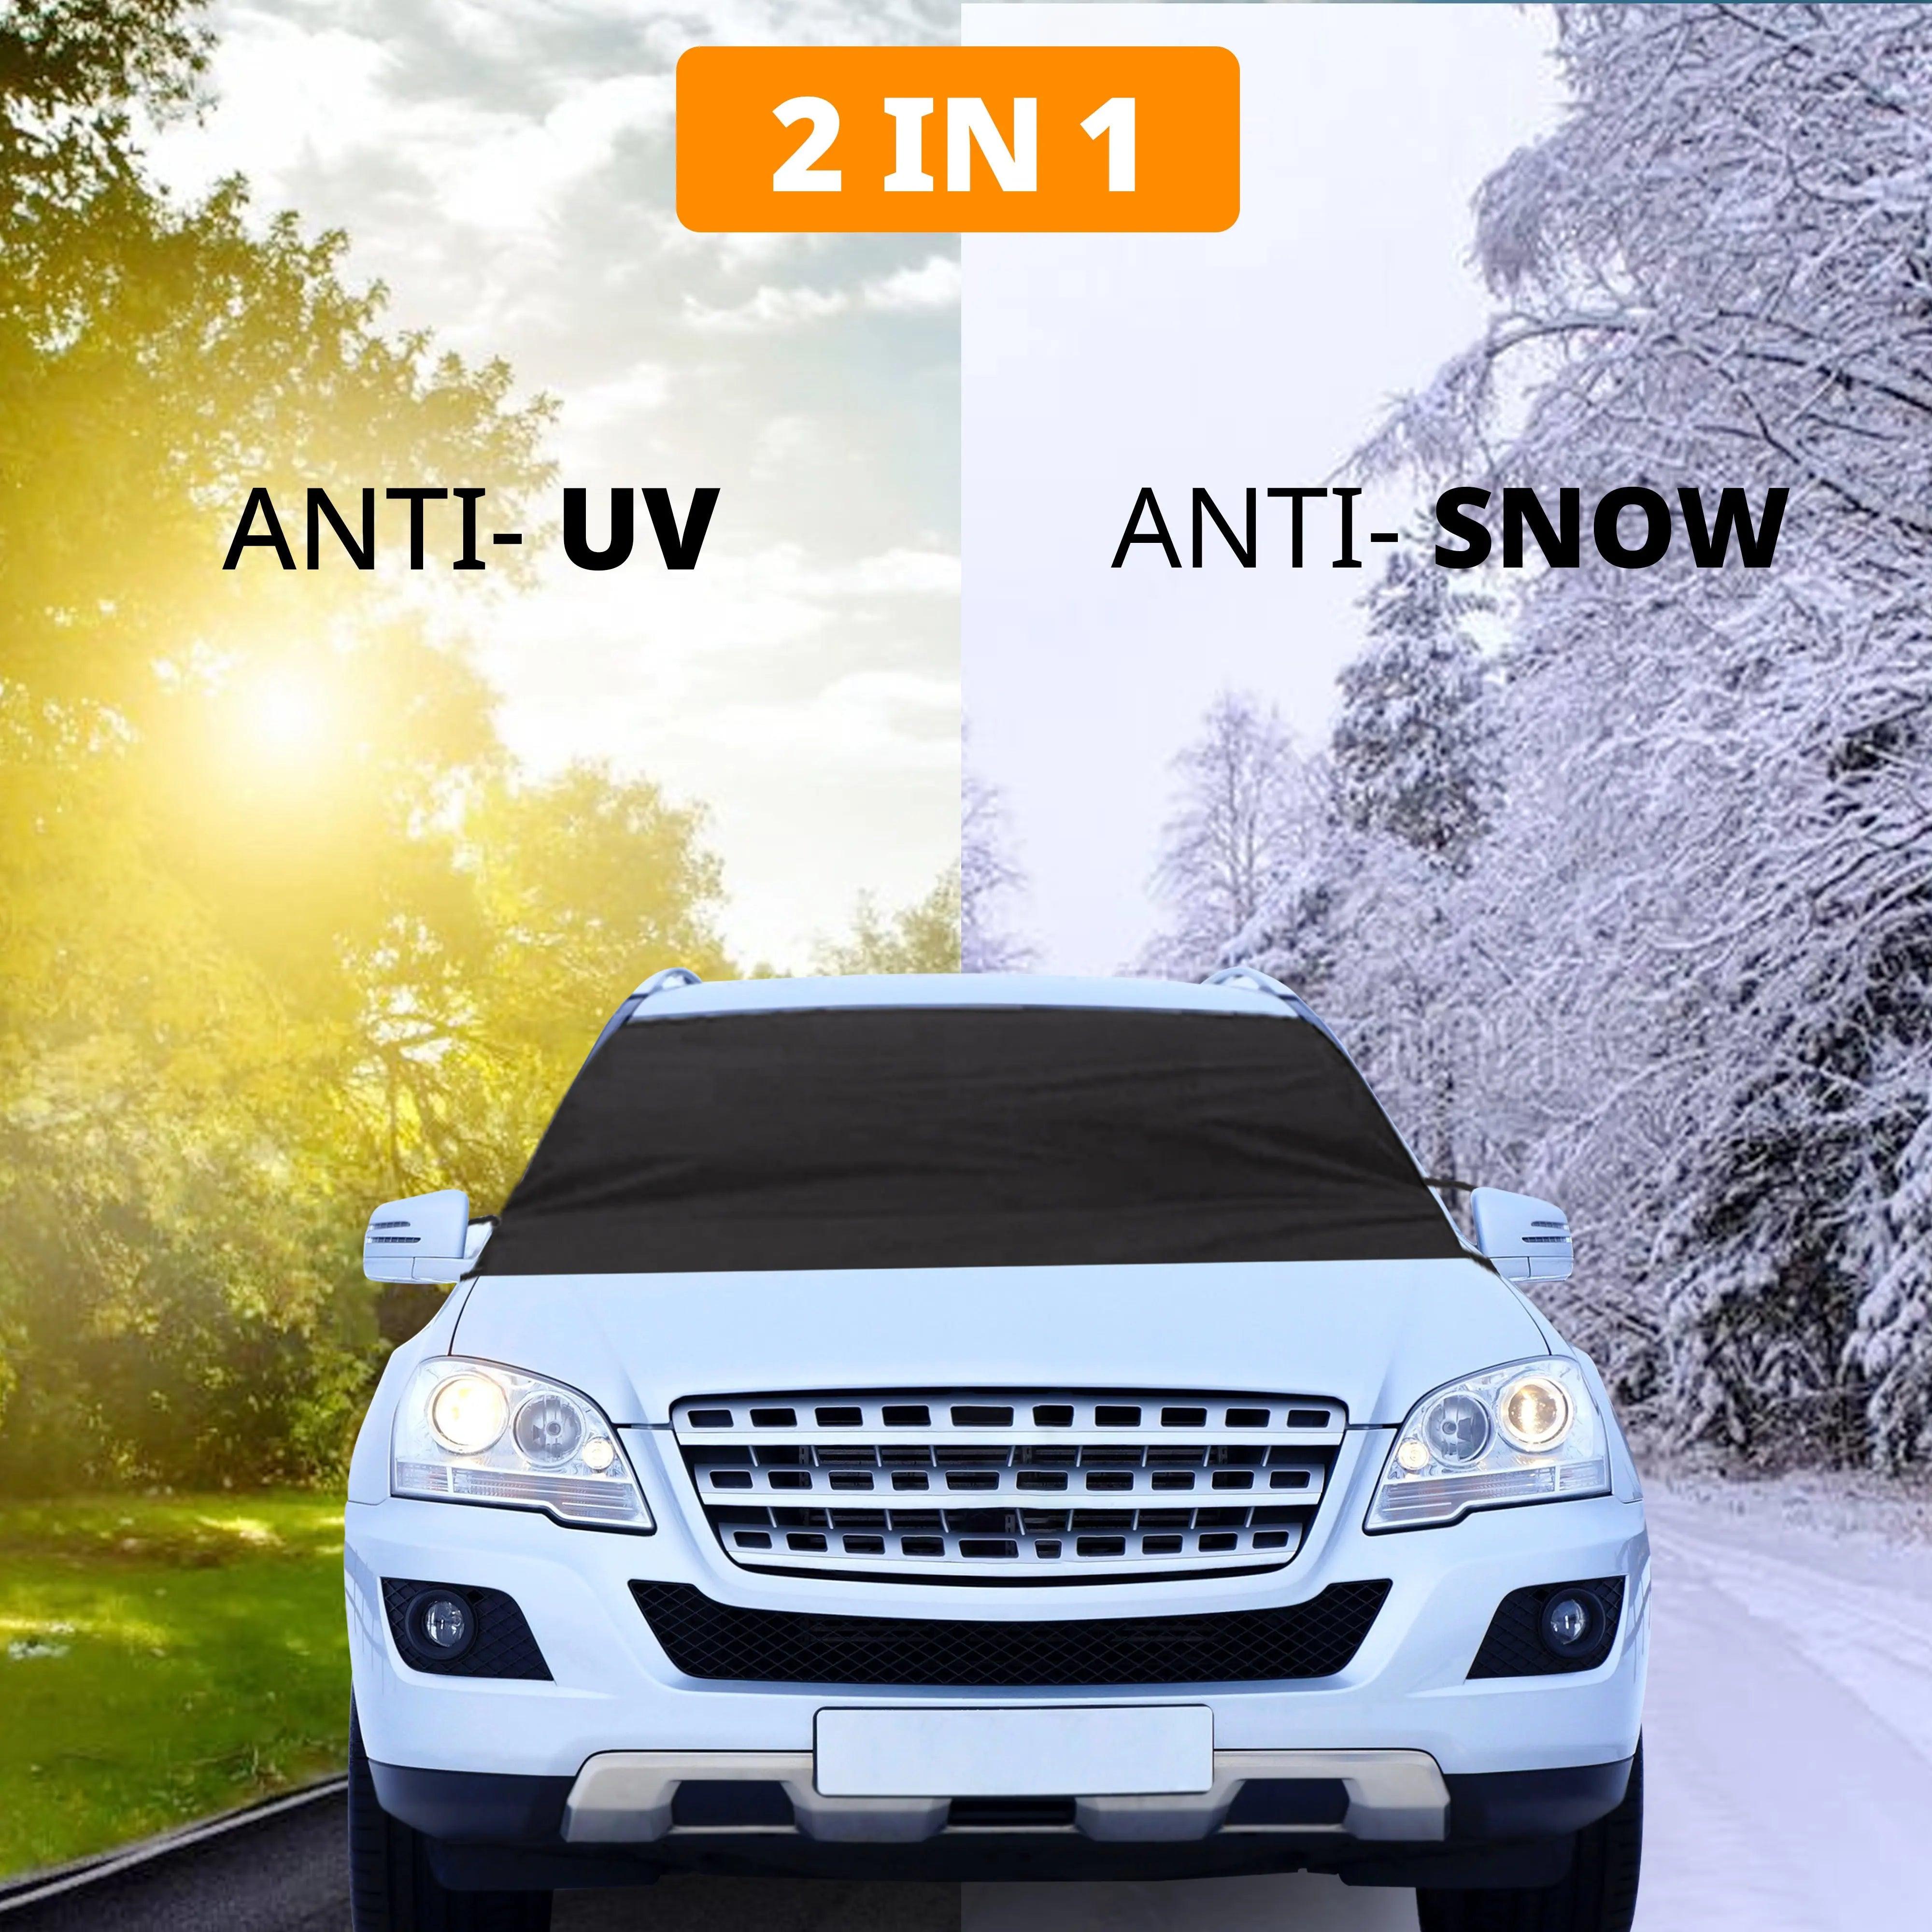 Car Snow Cover protector for Windshield and Roof